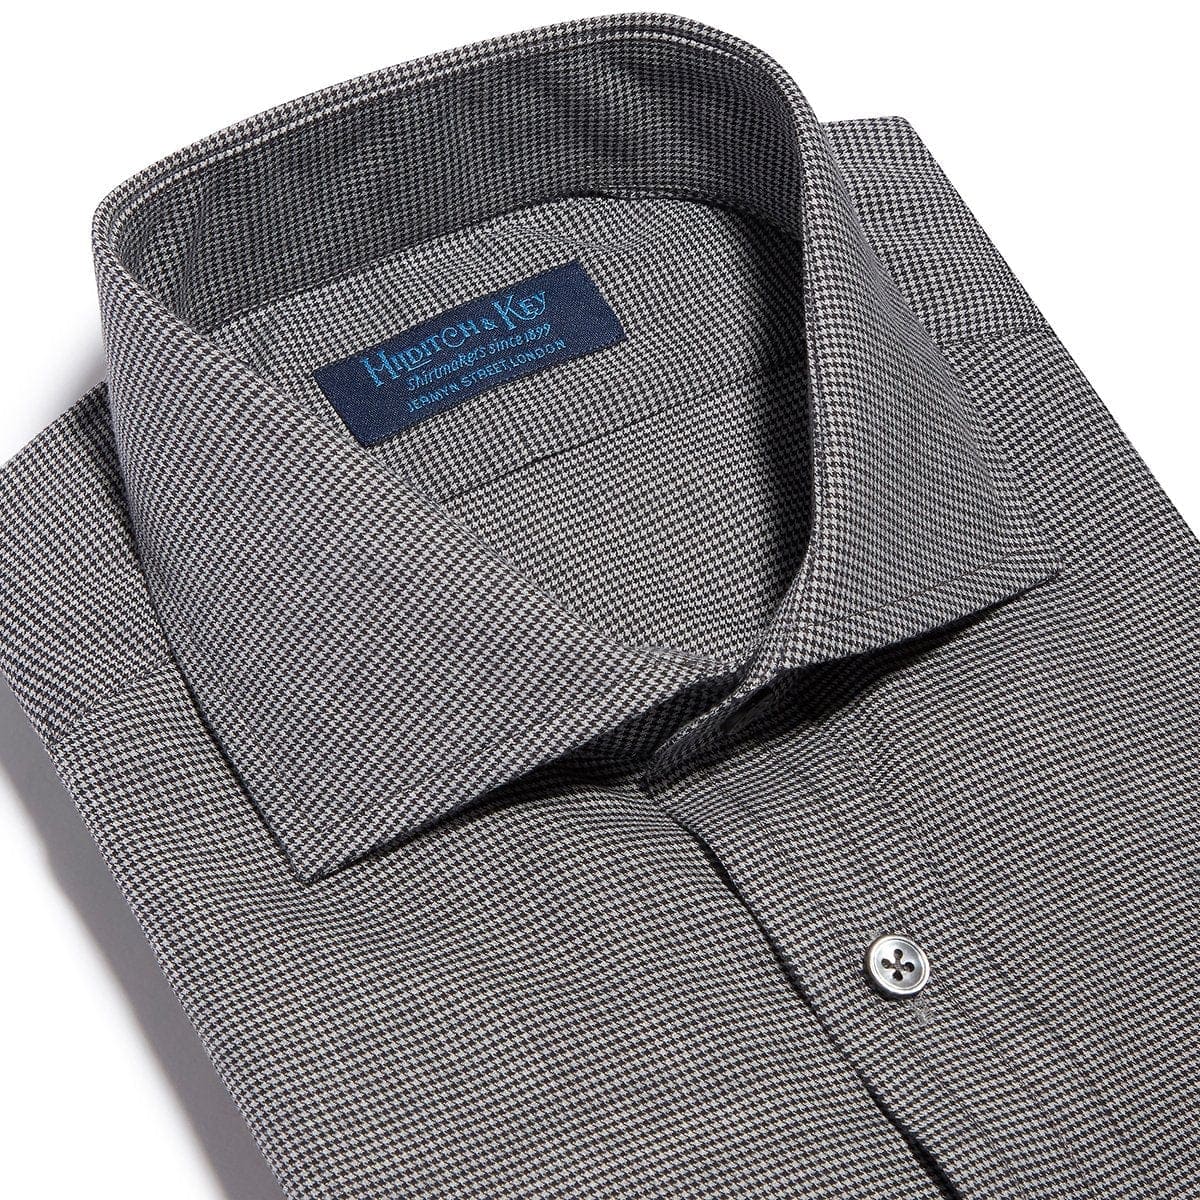 Contemporary Fit, Cut-away Collar, 2 Button Cuff Shirt in a Plain Grey & Black Houndstooth Cotton